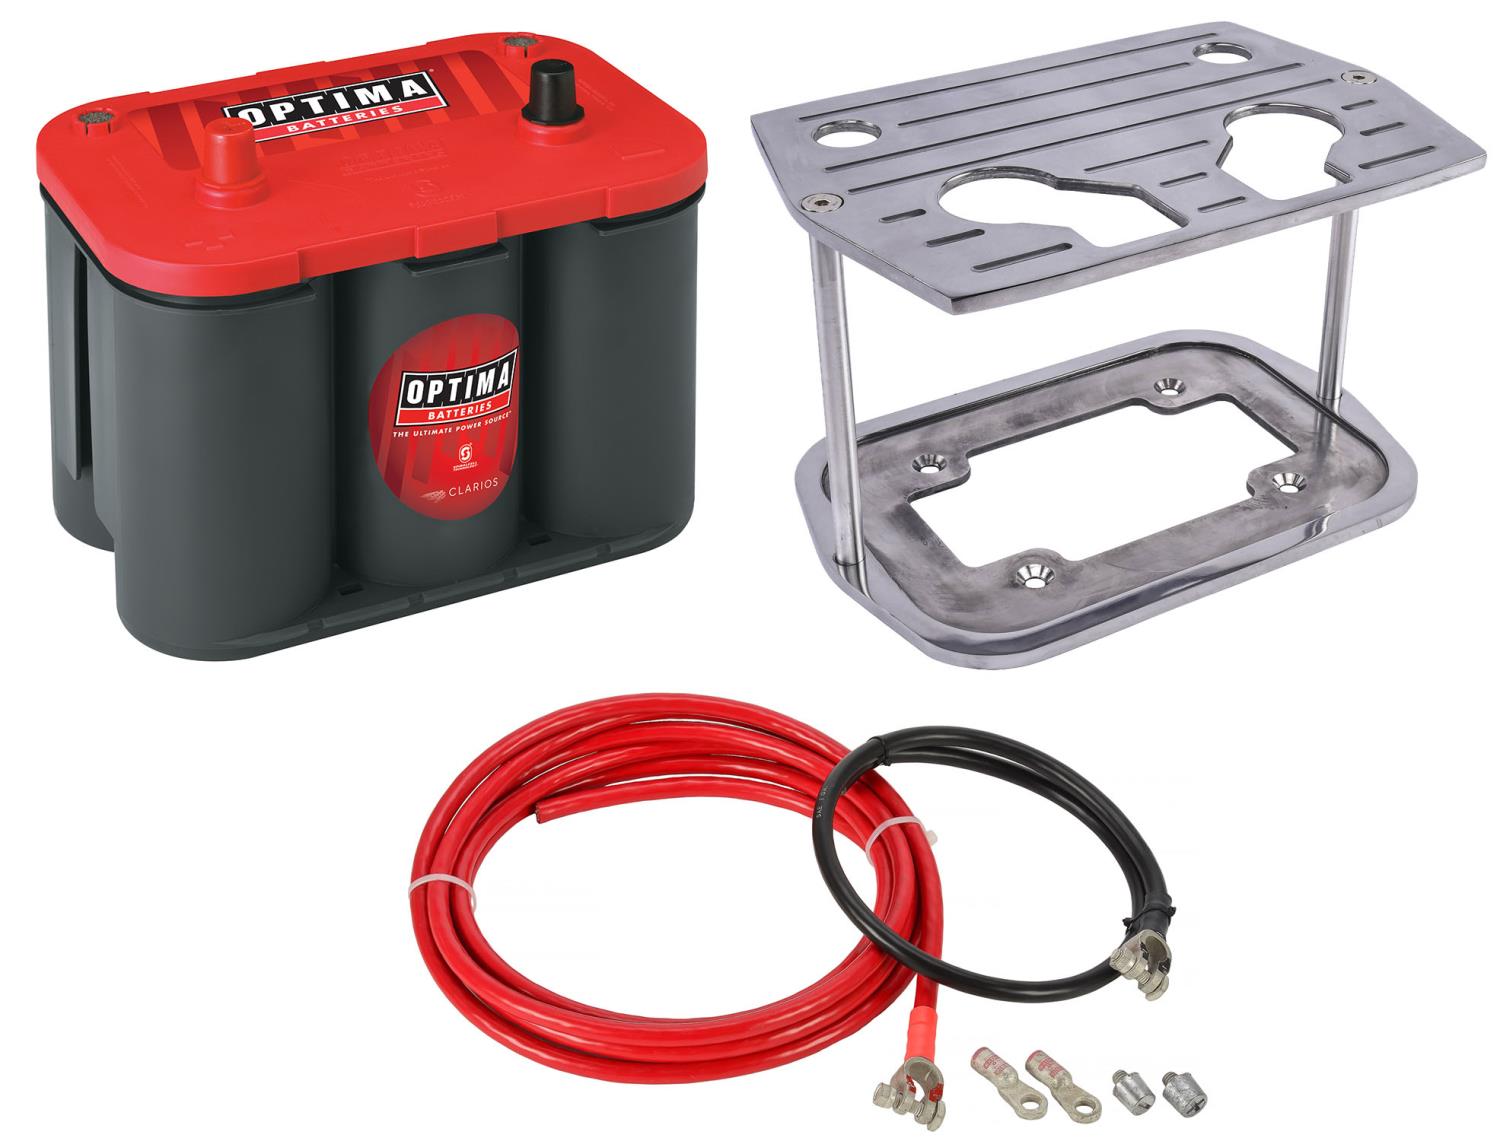 RedTop 12 V Battery and Ball Mill Finish Mount Kit